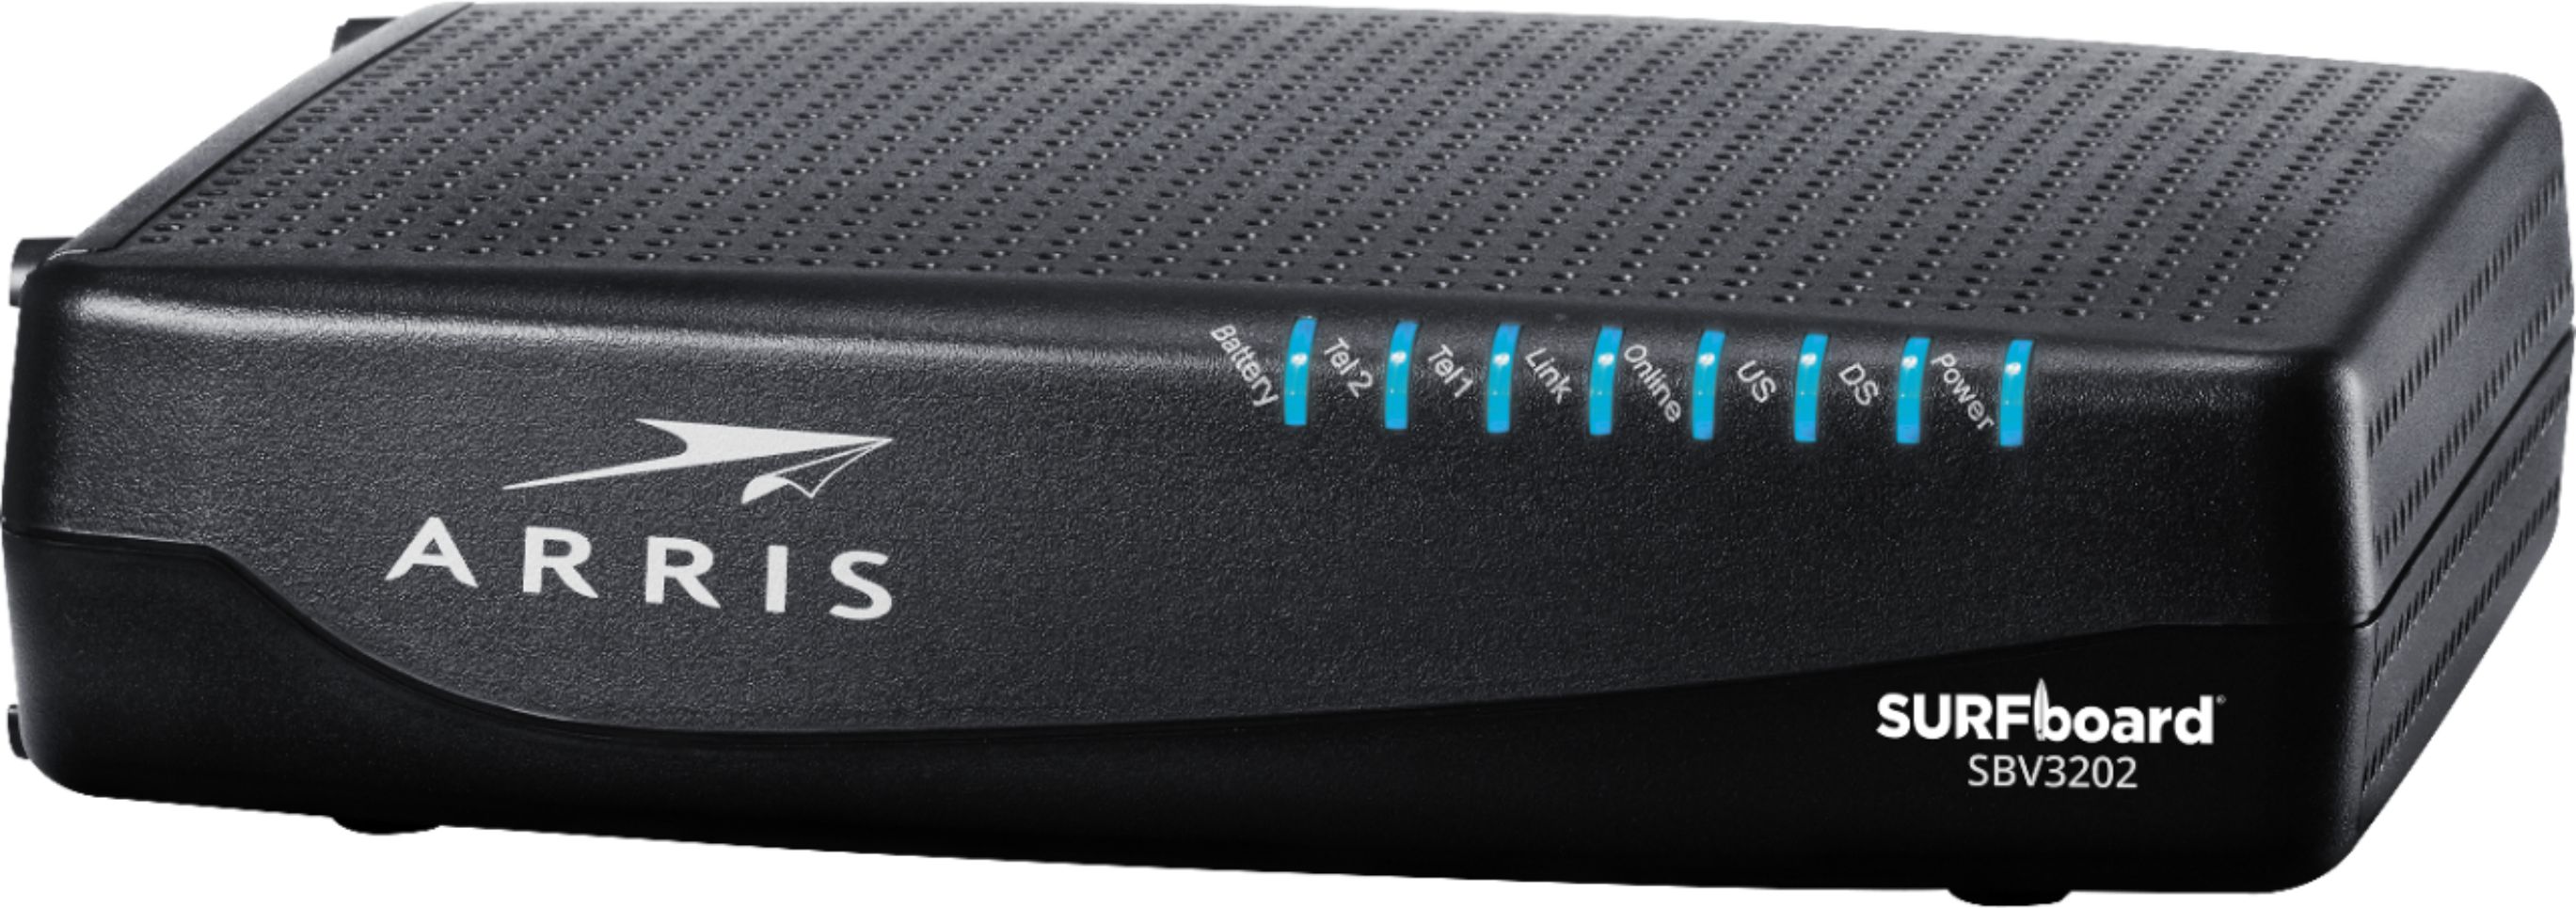 ARRIS  SURFboard 32 x 8 DOCSIS 3.0 Voice Cable Modem for Xfinity